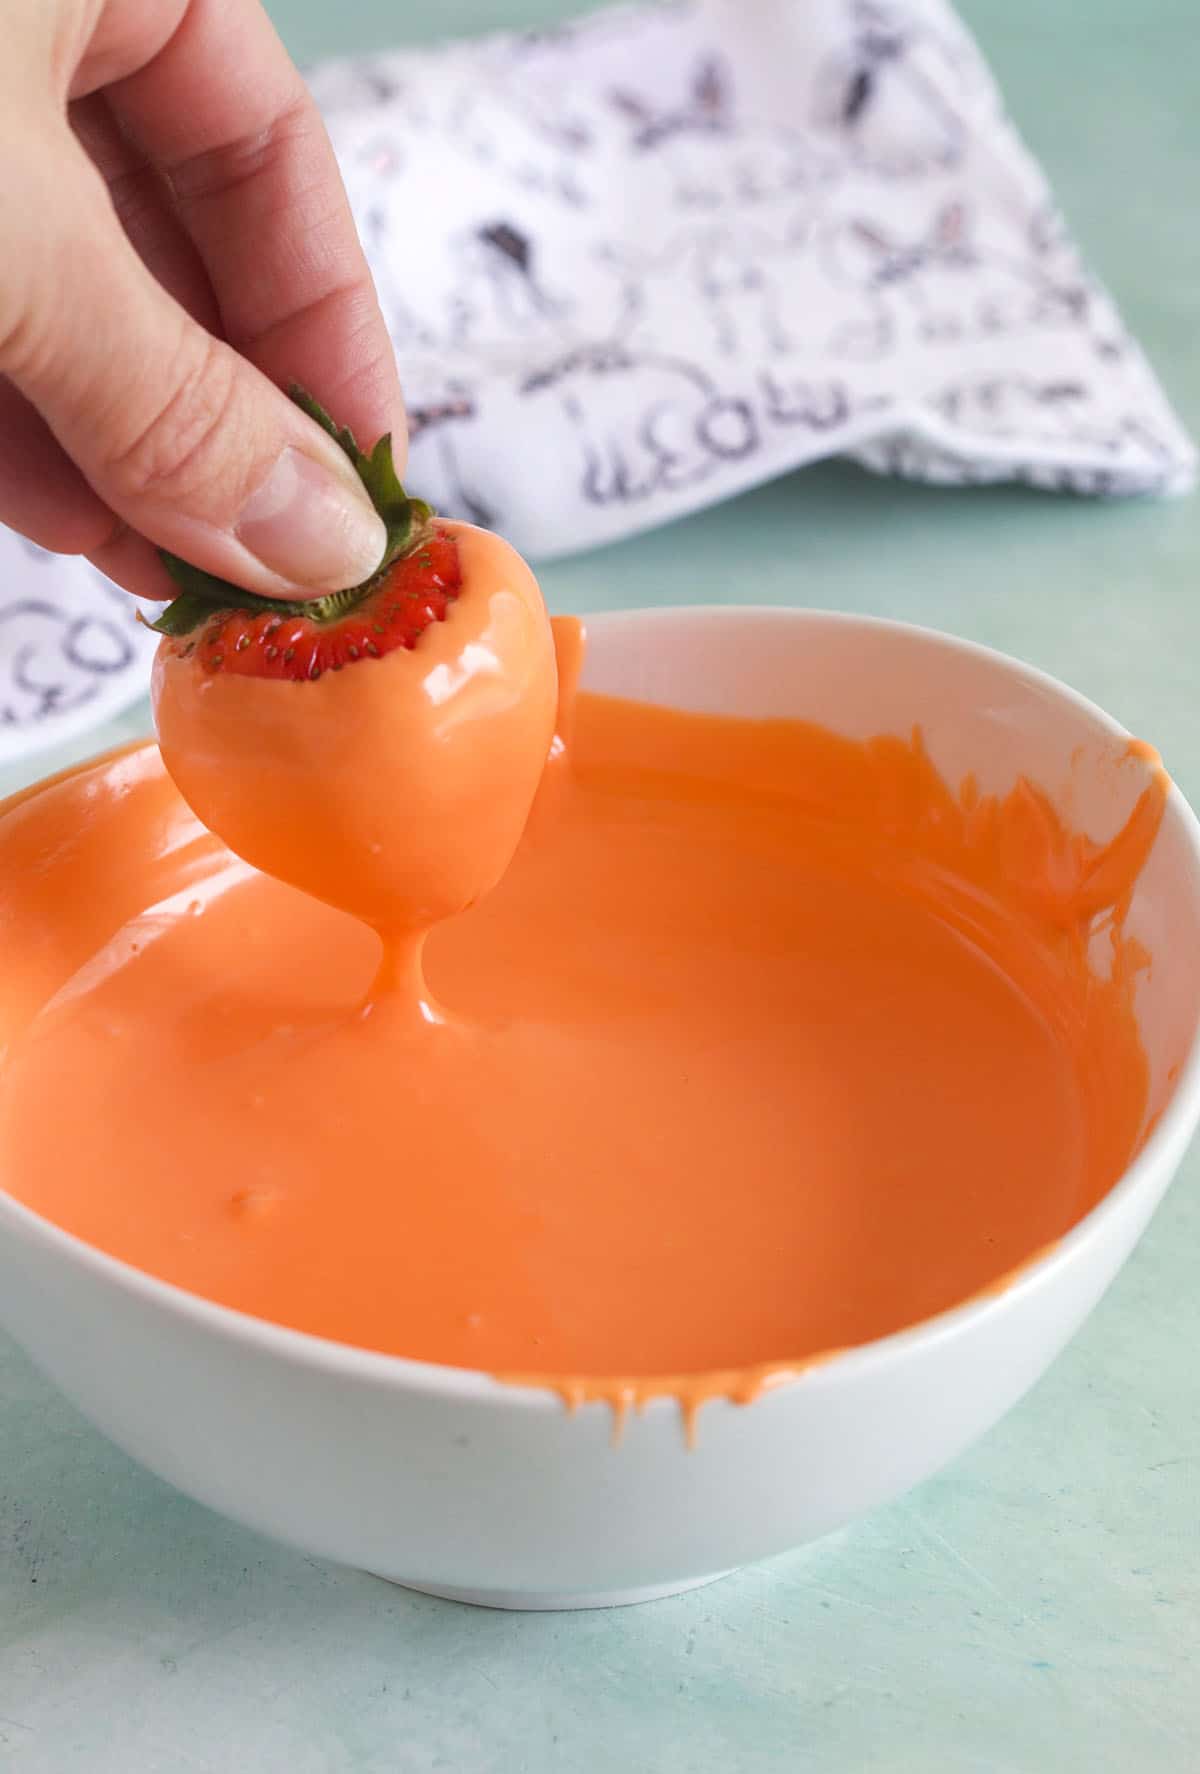 A strawberry dipped in orange chocolate is being removed from the white bowl. 